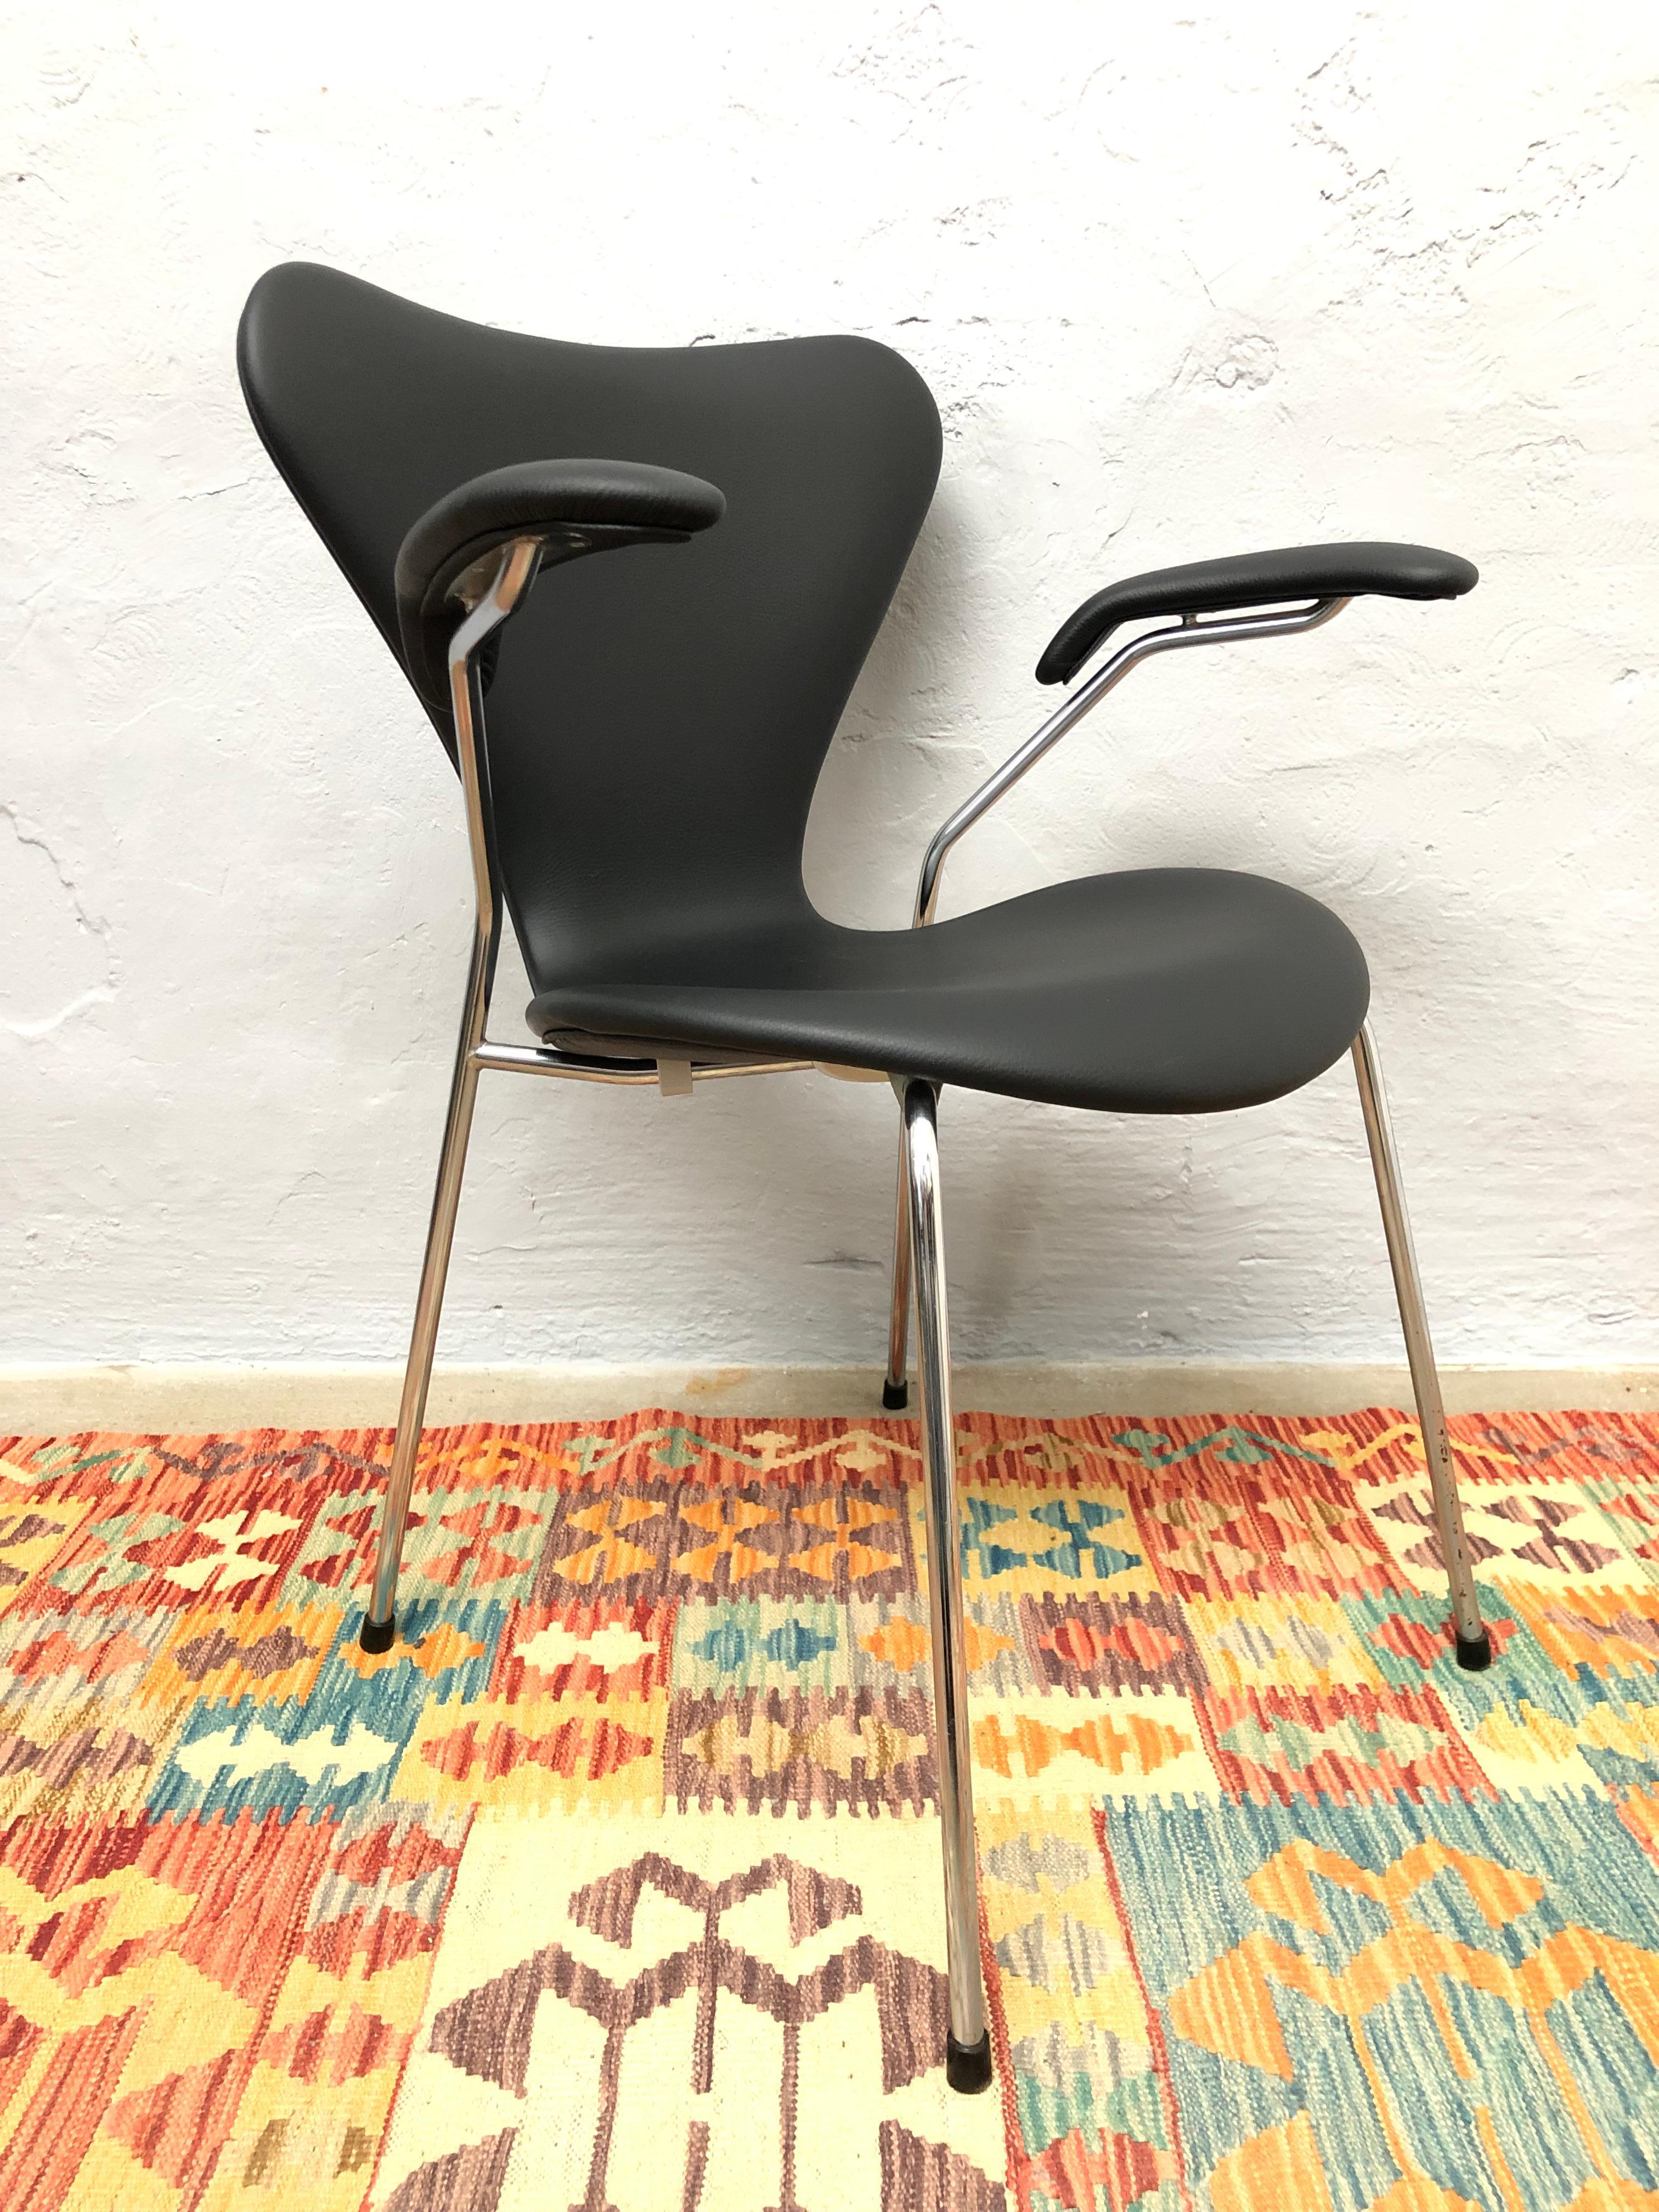 Hand-Crafted Vintage Set of 6 Iconic Arne Jacobsen 3207 Chairs Designed in 1955